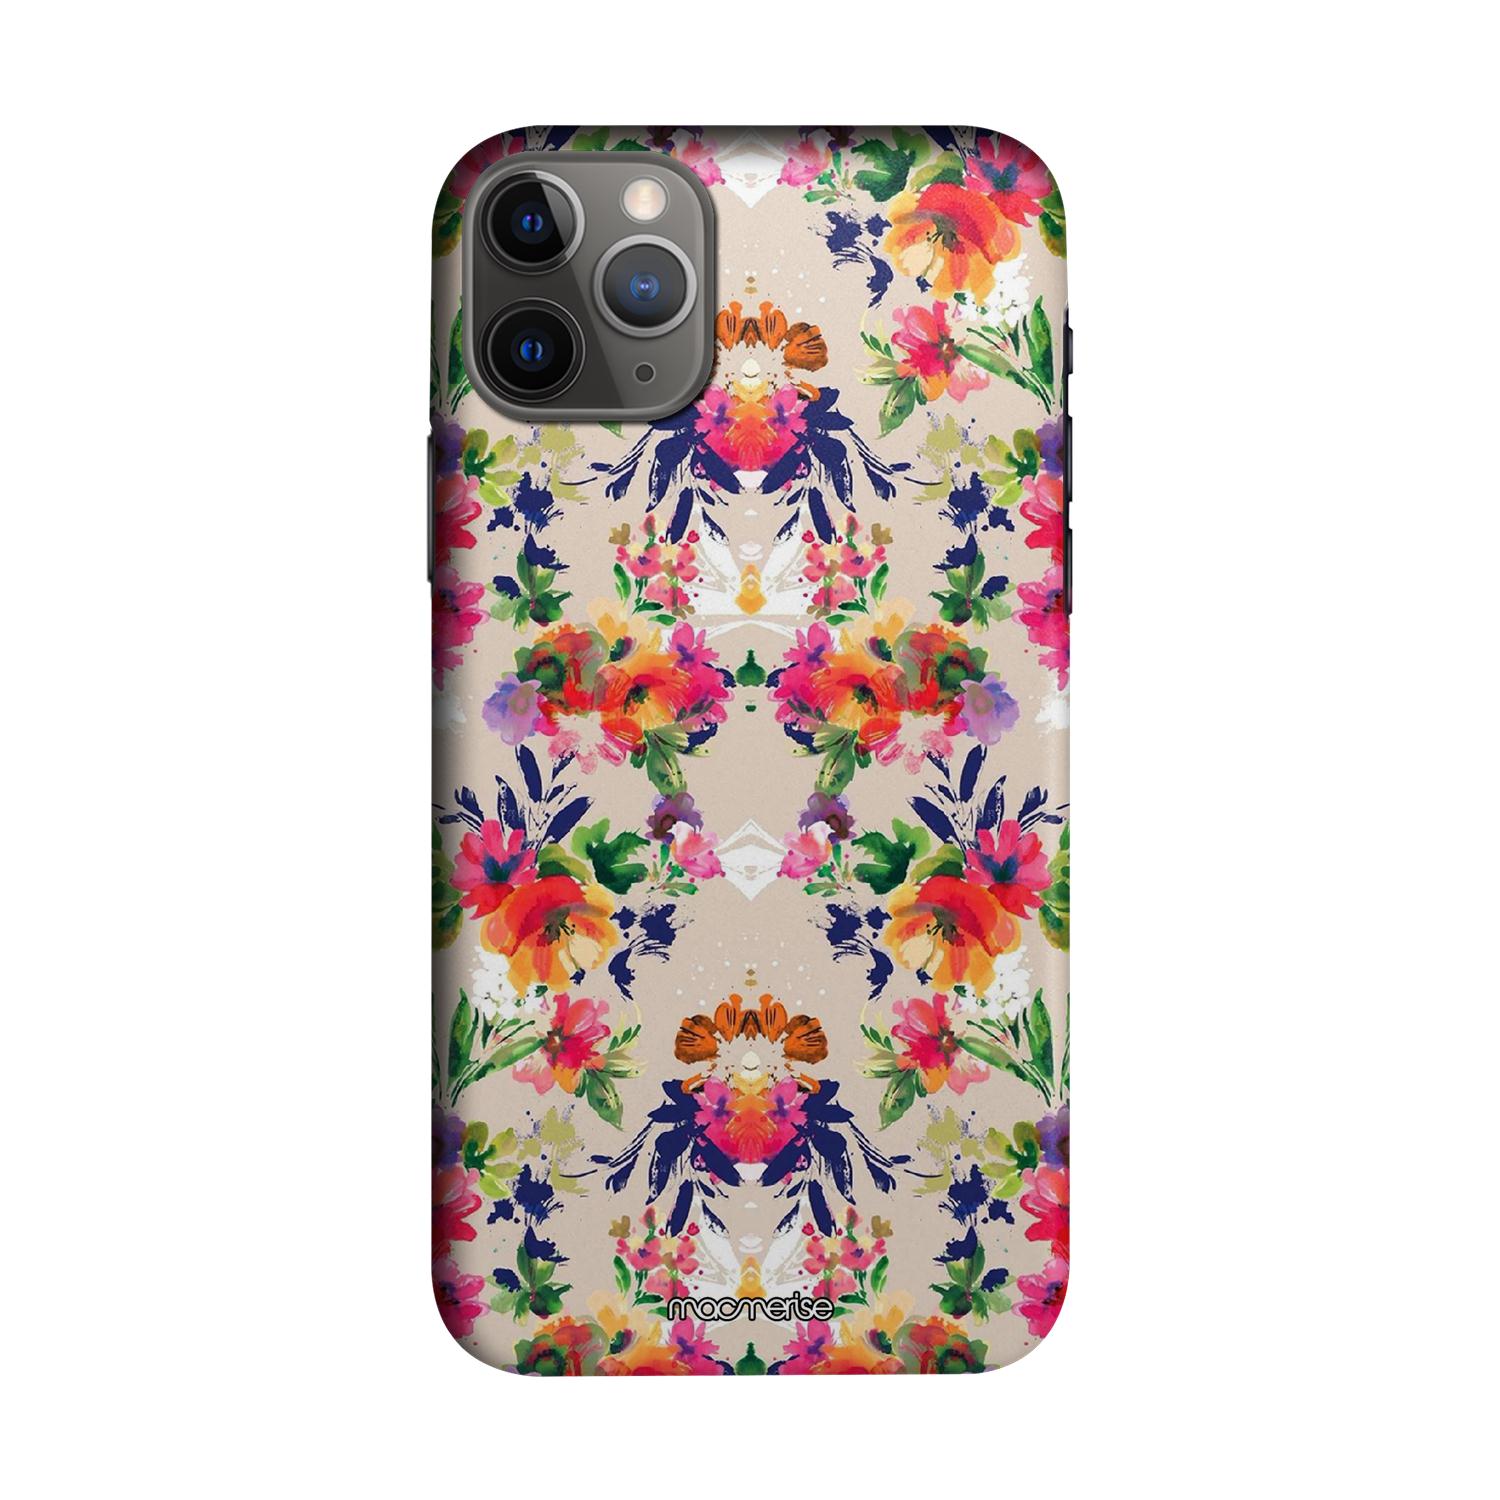 Buy Floral Symmetry - Sleek Phone Case for iPhone 11 Pro Max Online